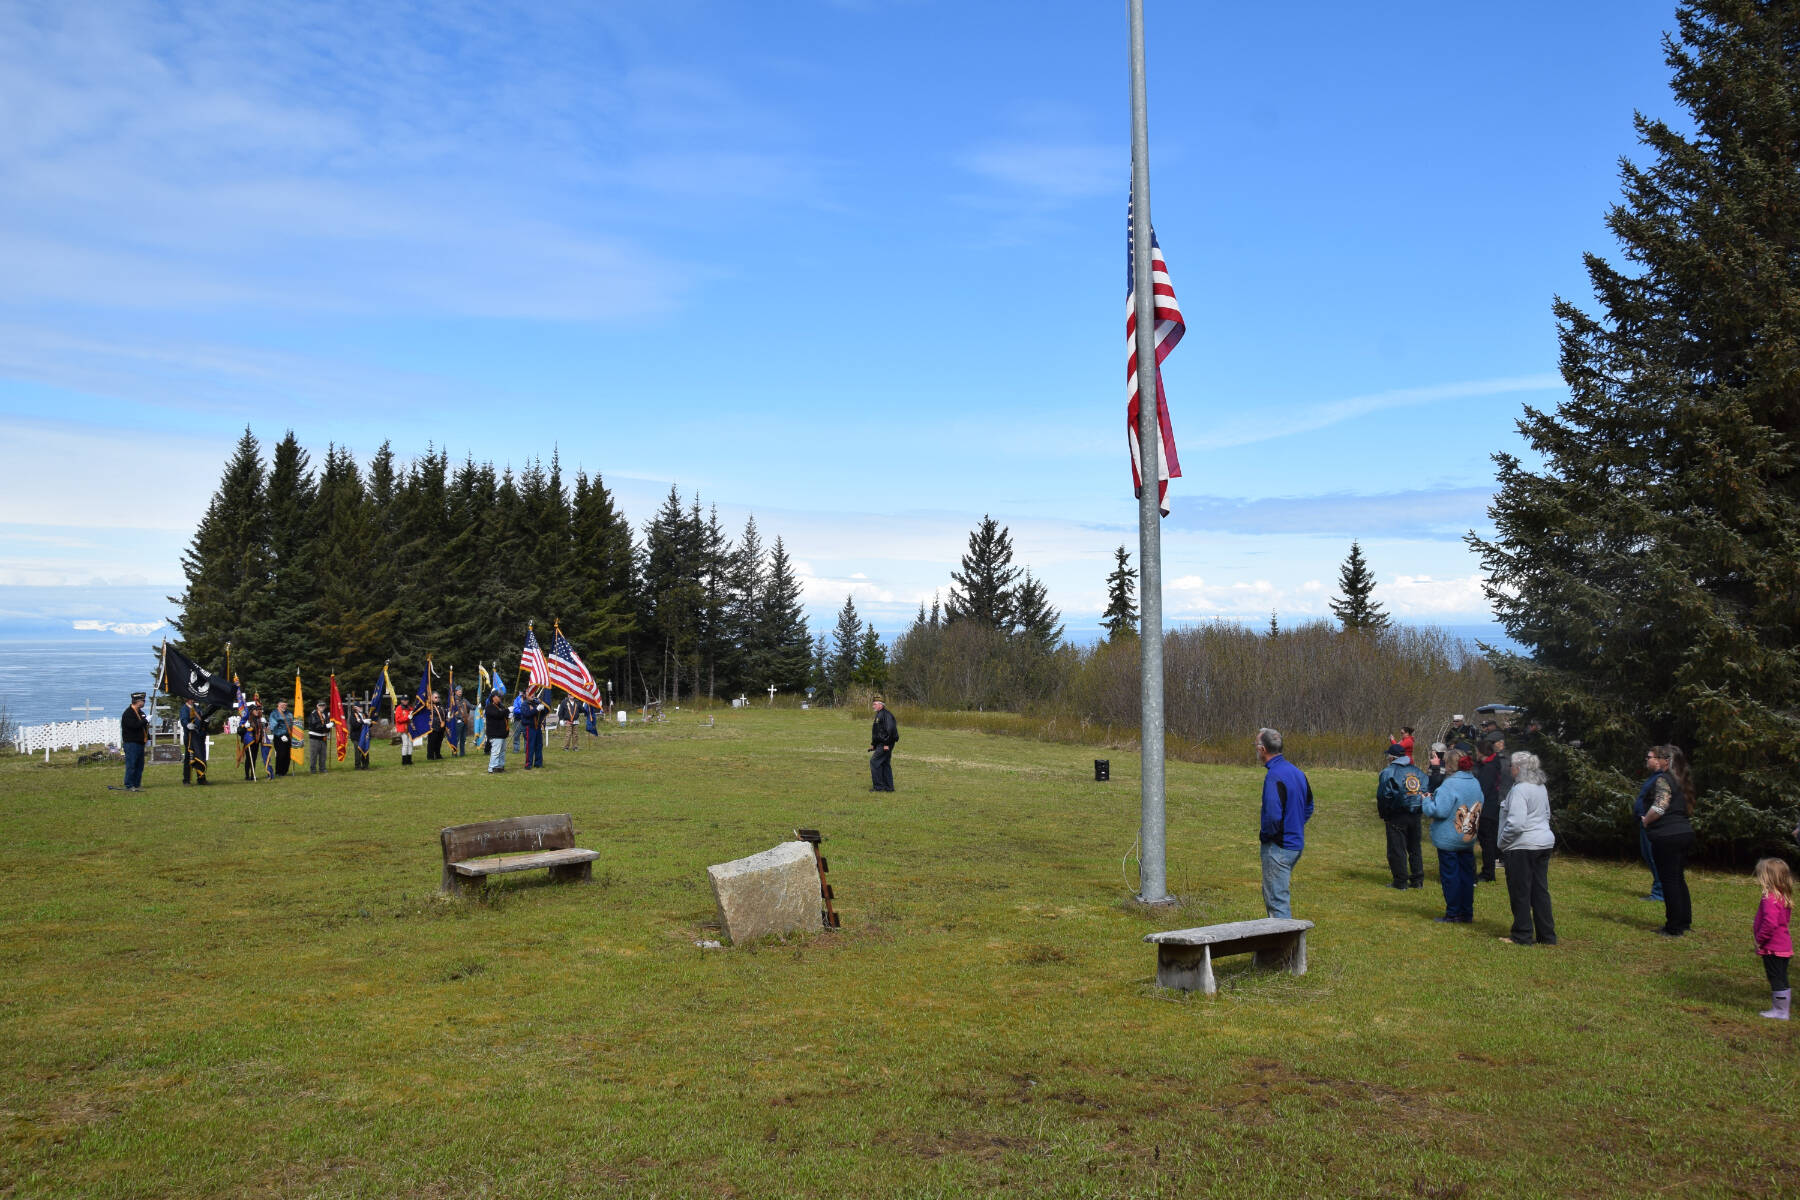 Community members attend a Memorial Day service hosted by VFW Post 10221 at the Anchor Point Kallman Cemetery on Monday, May 29, 2023 in Anchor Point, Alaska. (Delcenia Cosman/Homer News)